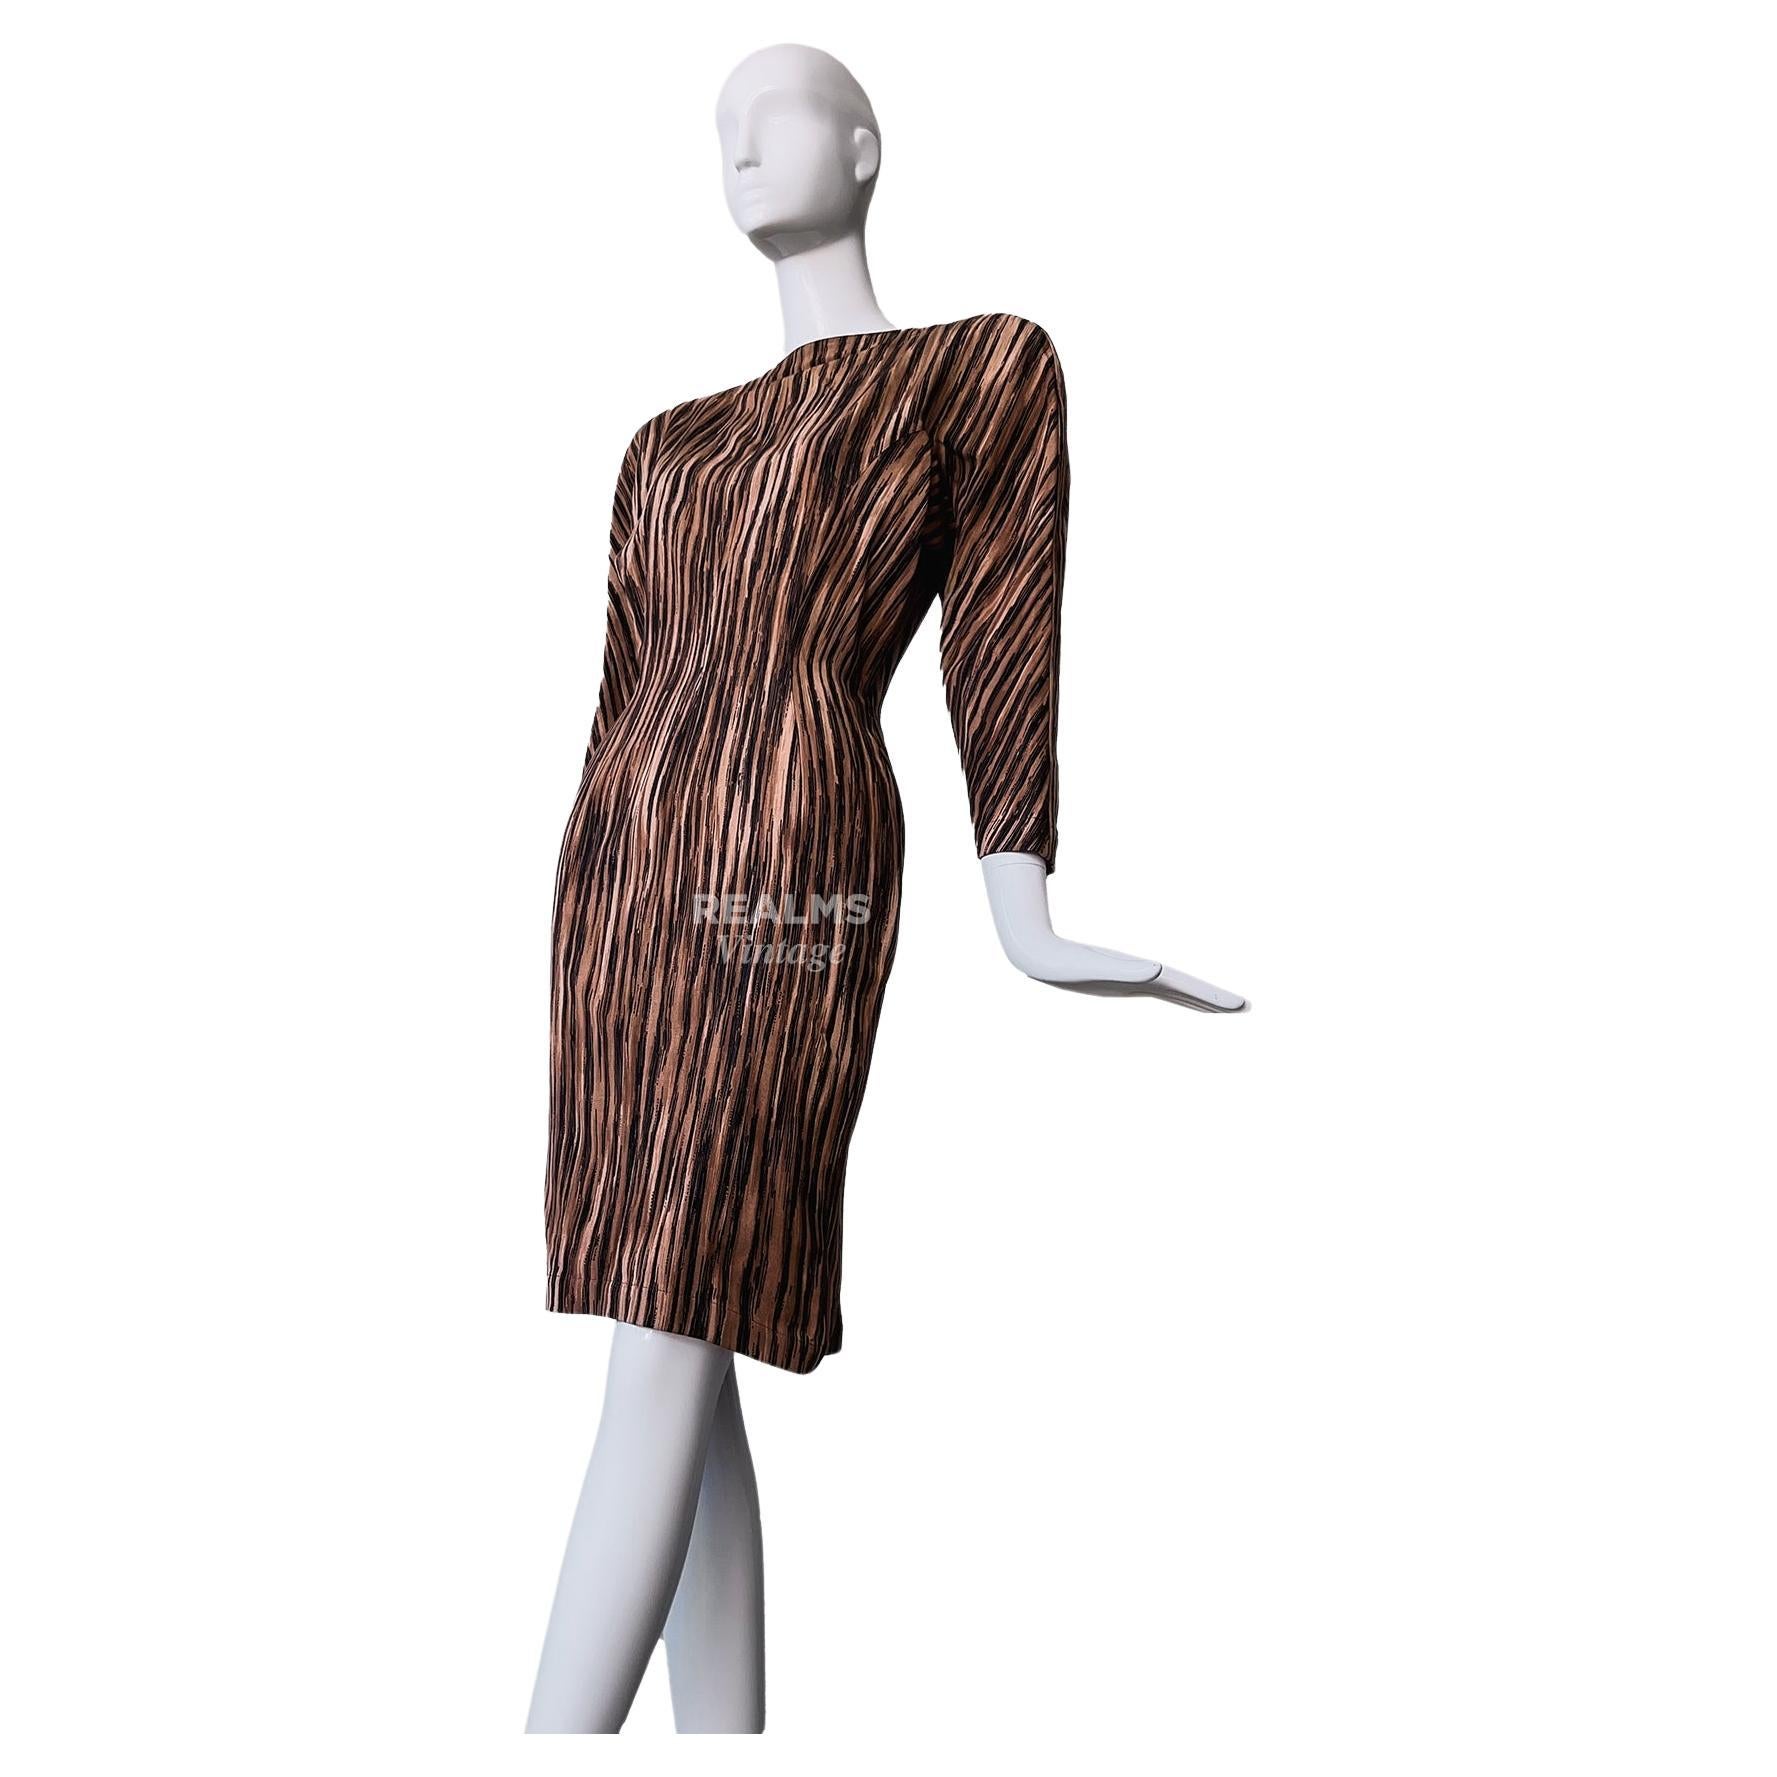 Rare Thierry Mugler SS 1988 Iconic African Collection Sculptural Dress For Sale